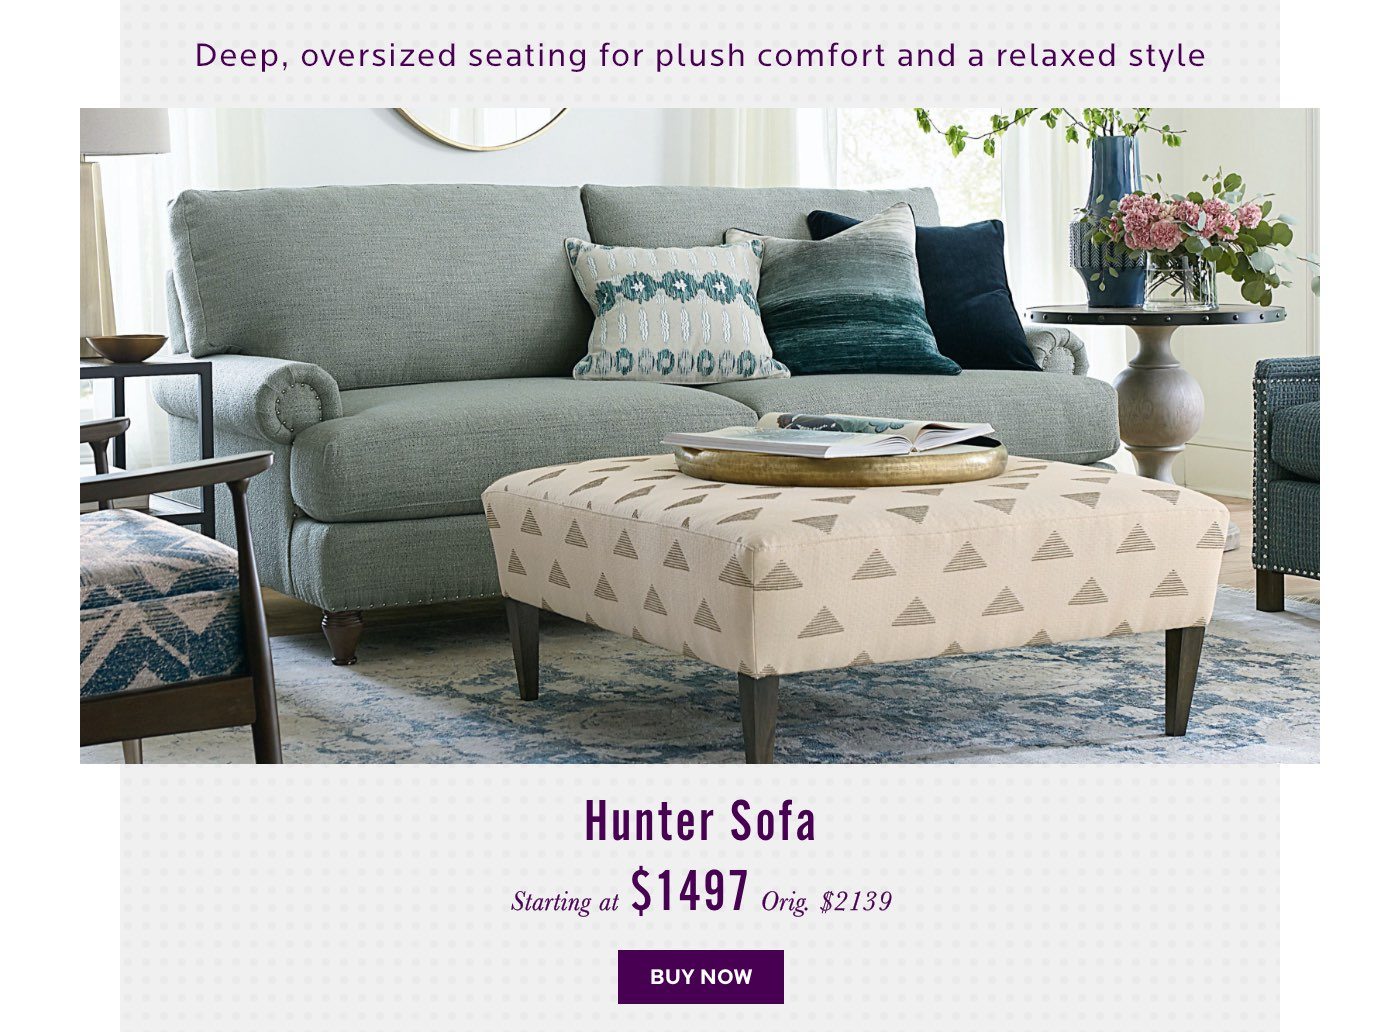 Hunter Sofa. Deep, oversized seating for plush comfort and relaxed style. Buy Now.